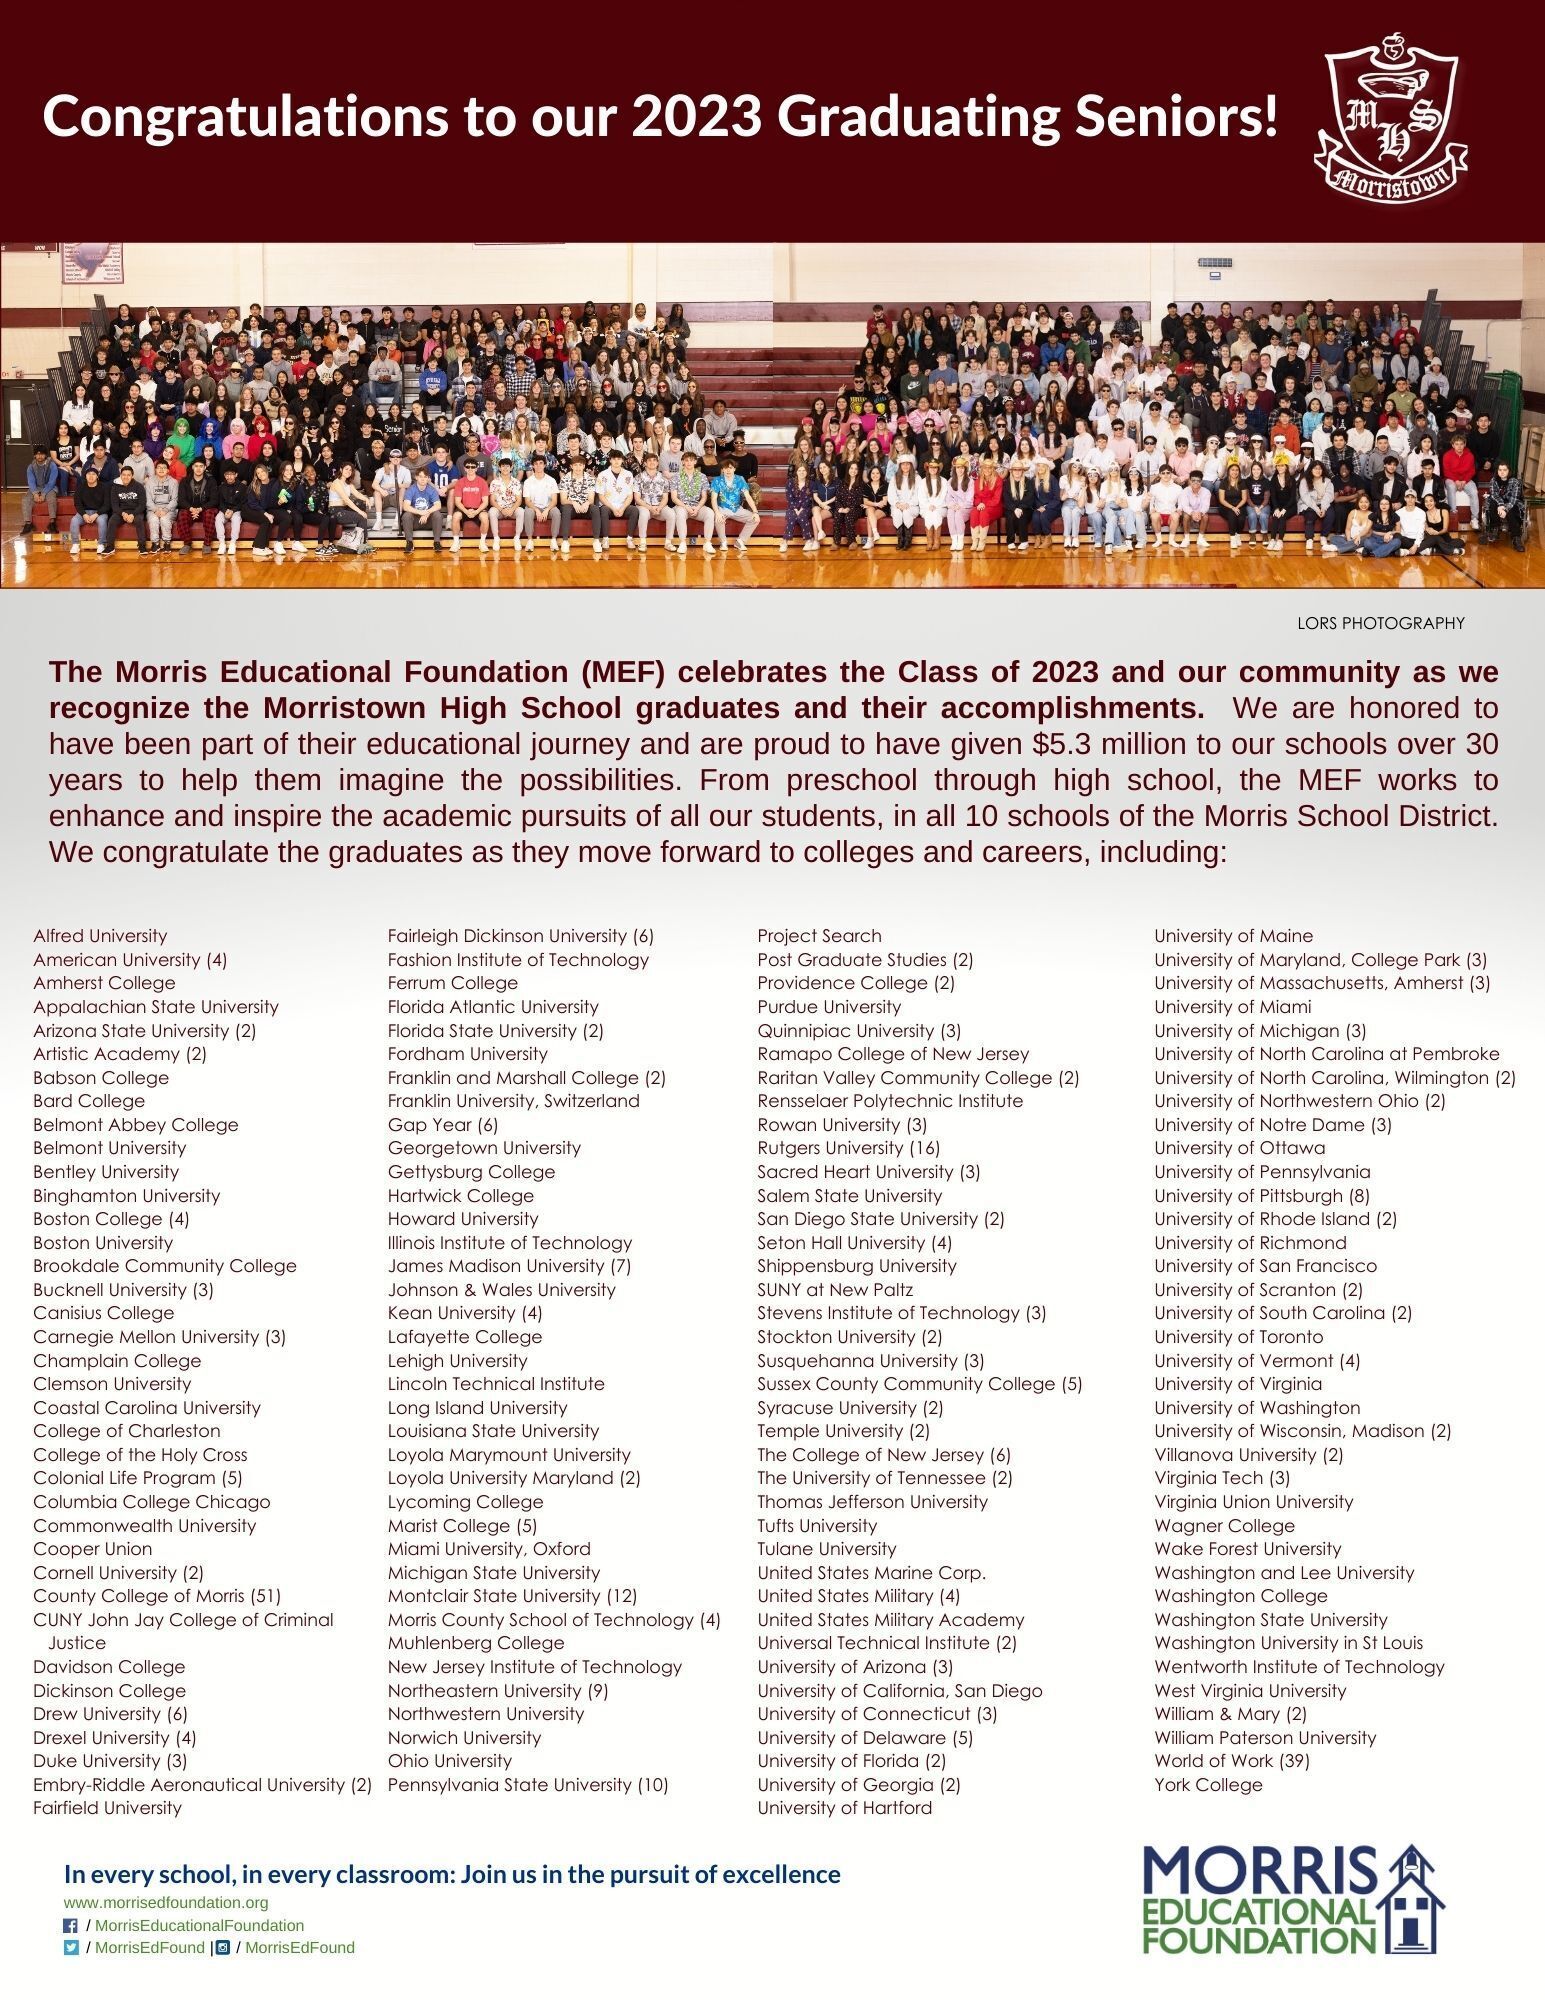 Congratulations to the Morristown High School Class of 2023